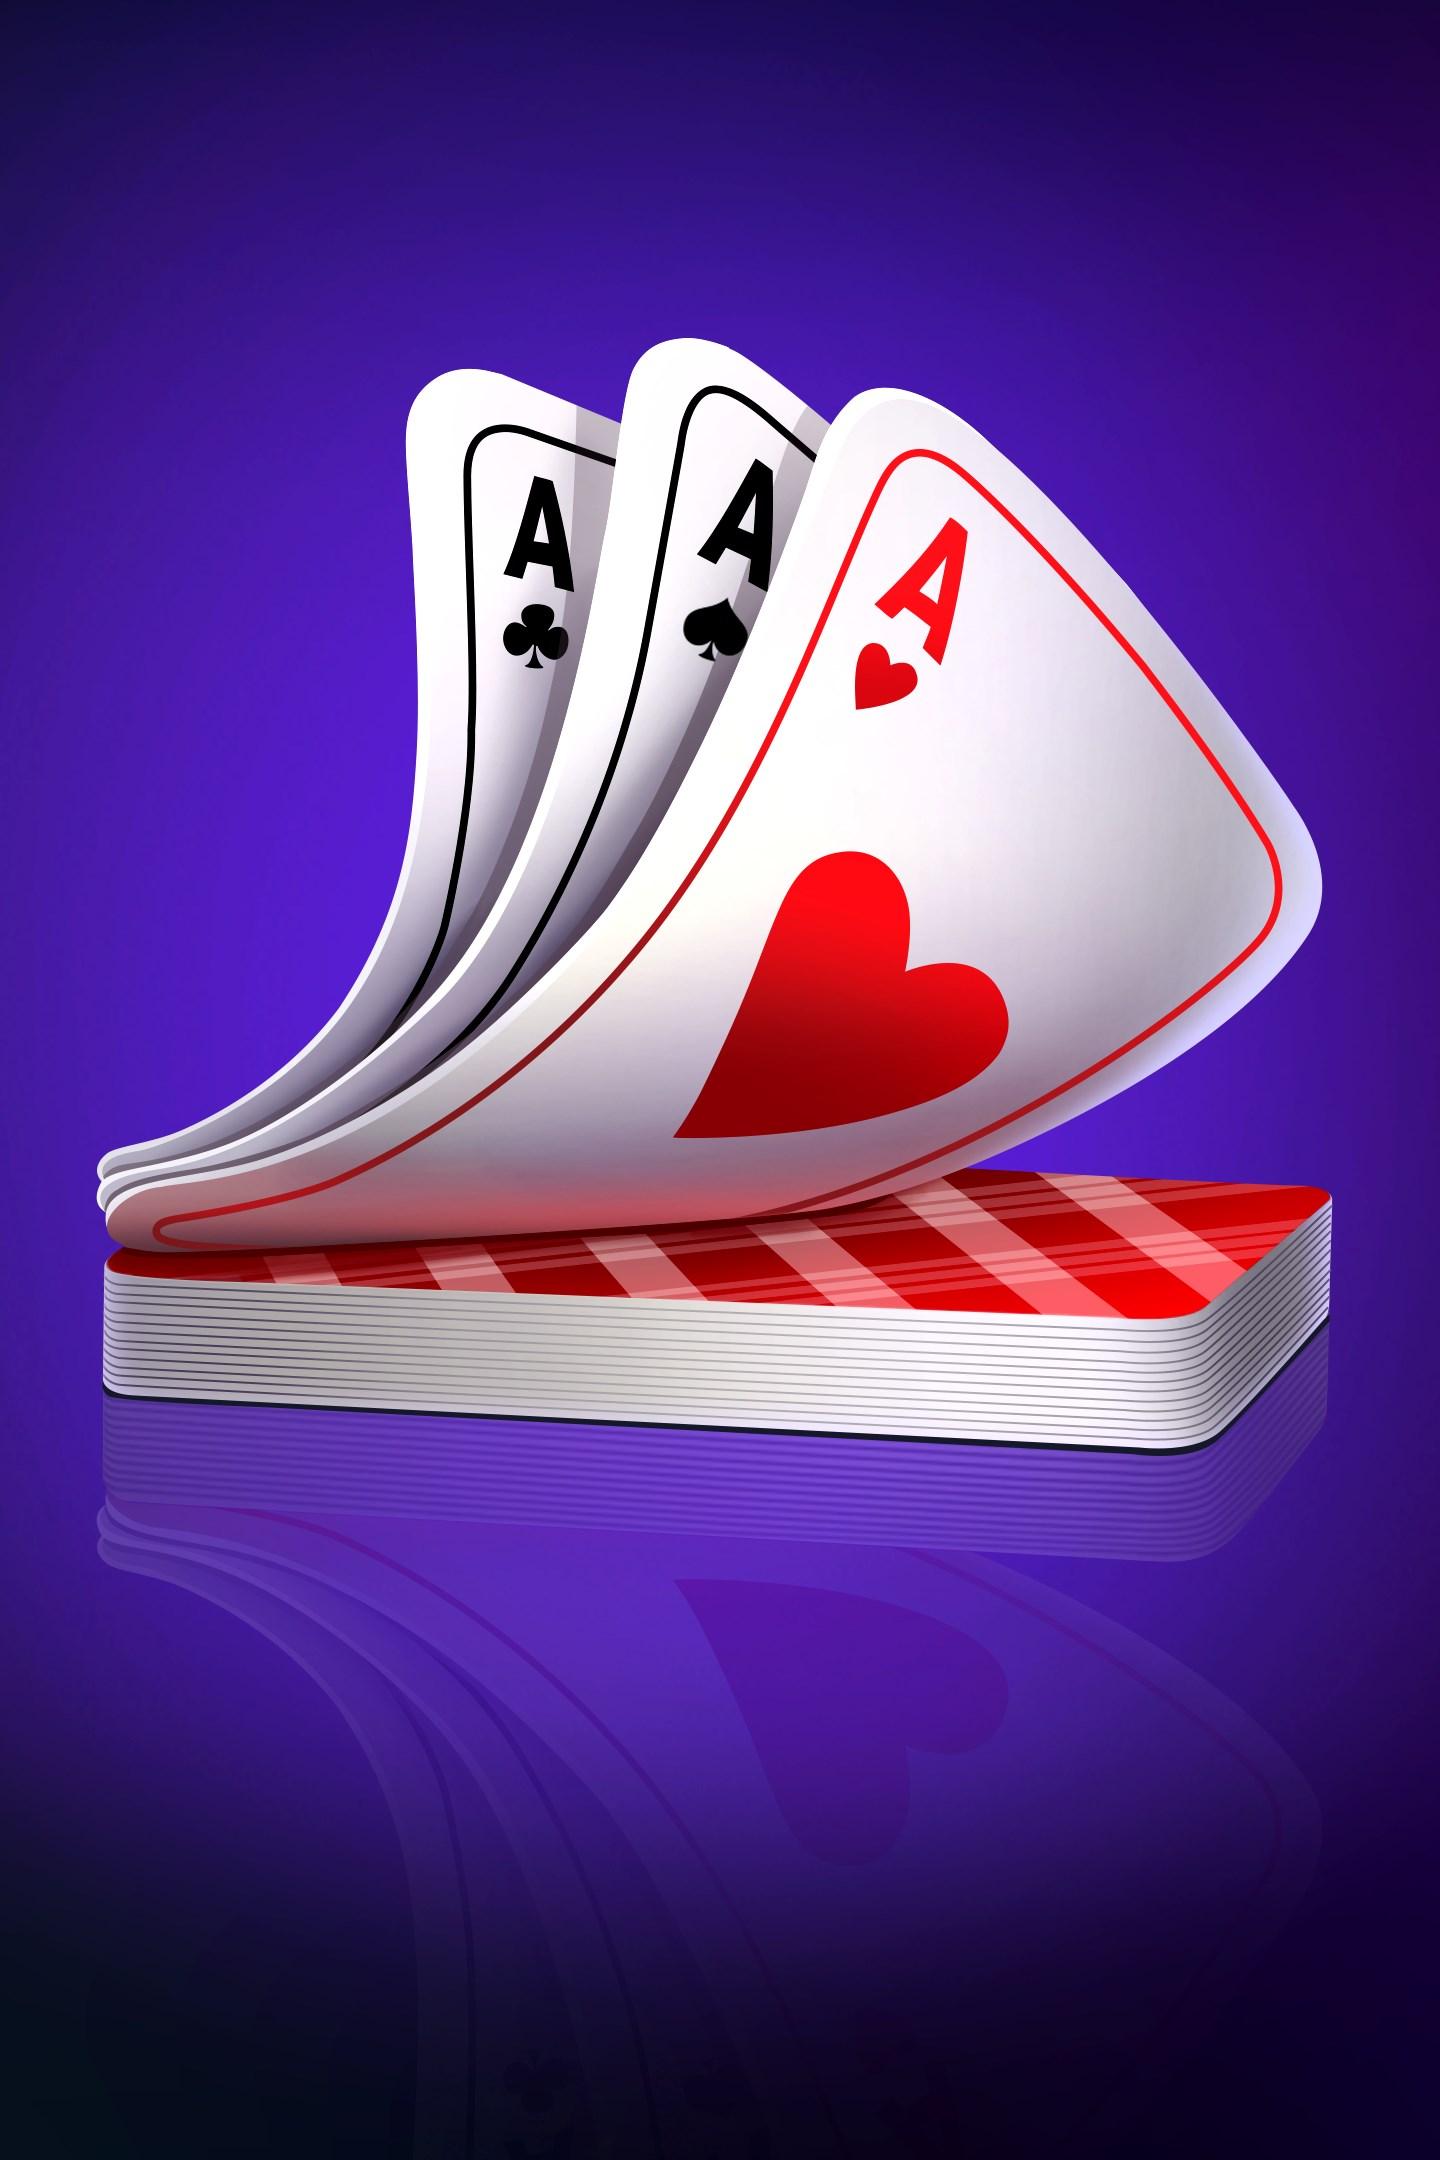 Durak: Fun Card Game download the new for apple